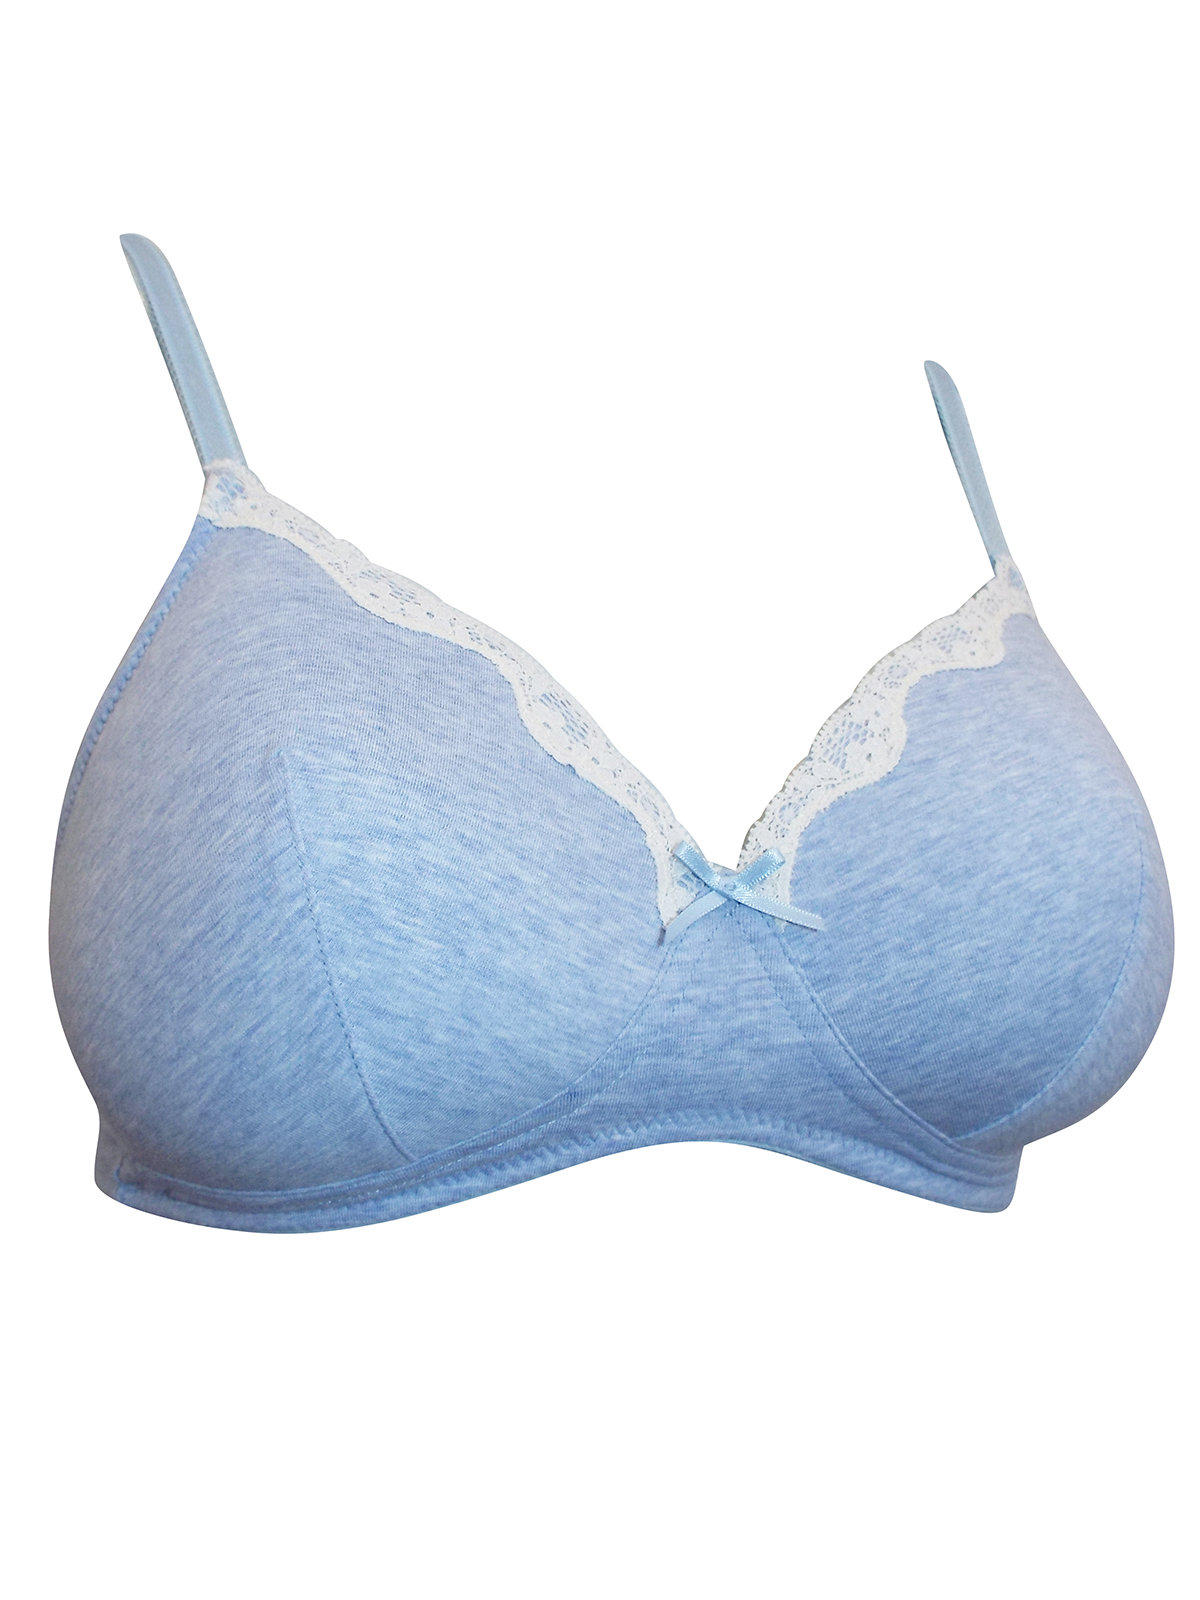 New Ex M&S All-Over Fleur Lace Underwired Non Padded Bra Sizes 32-42 A-E Blue 